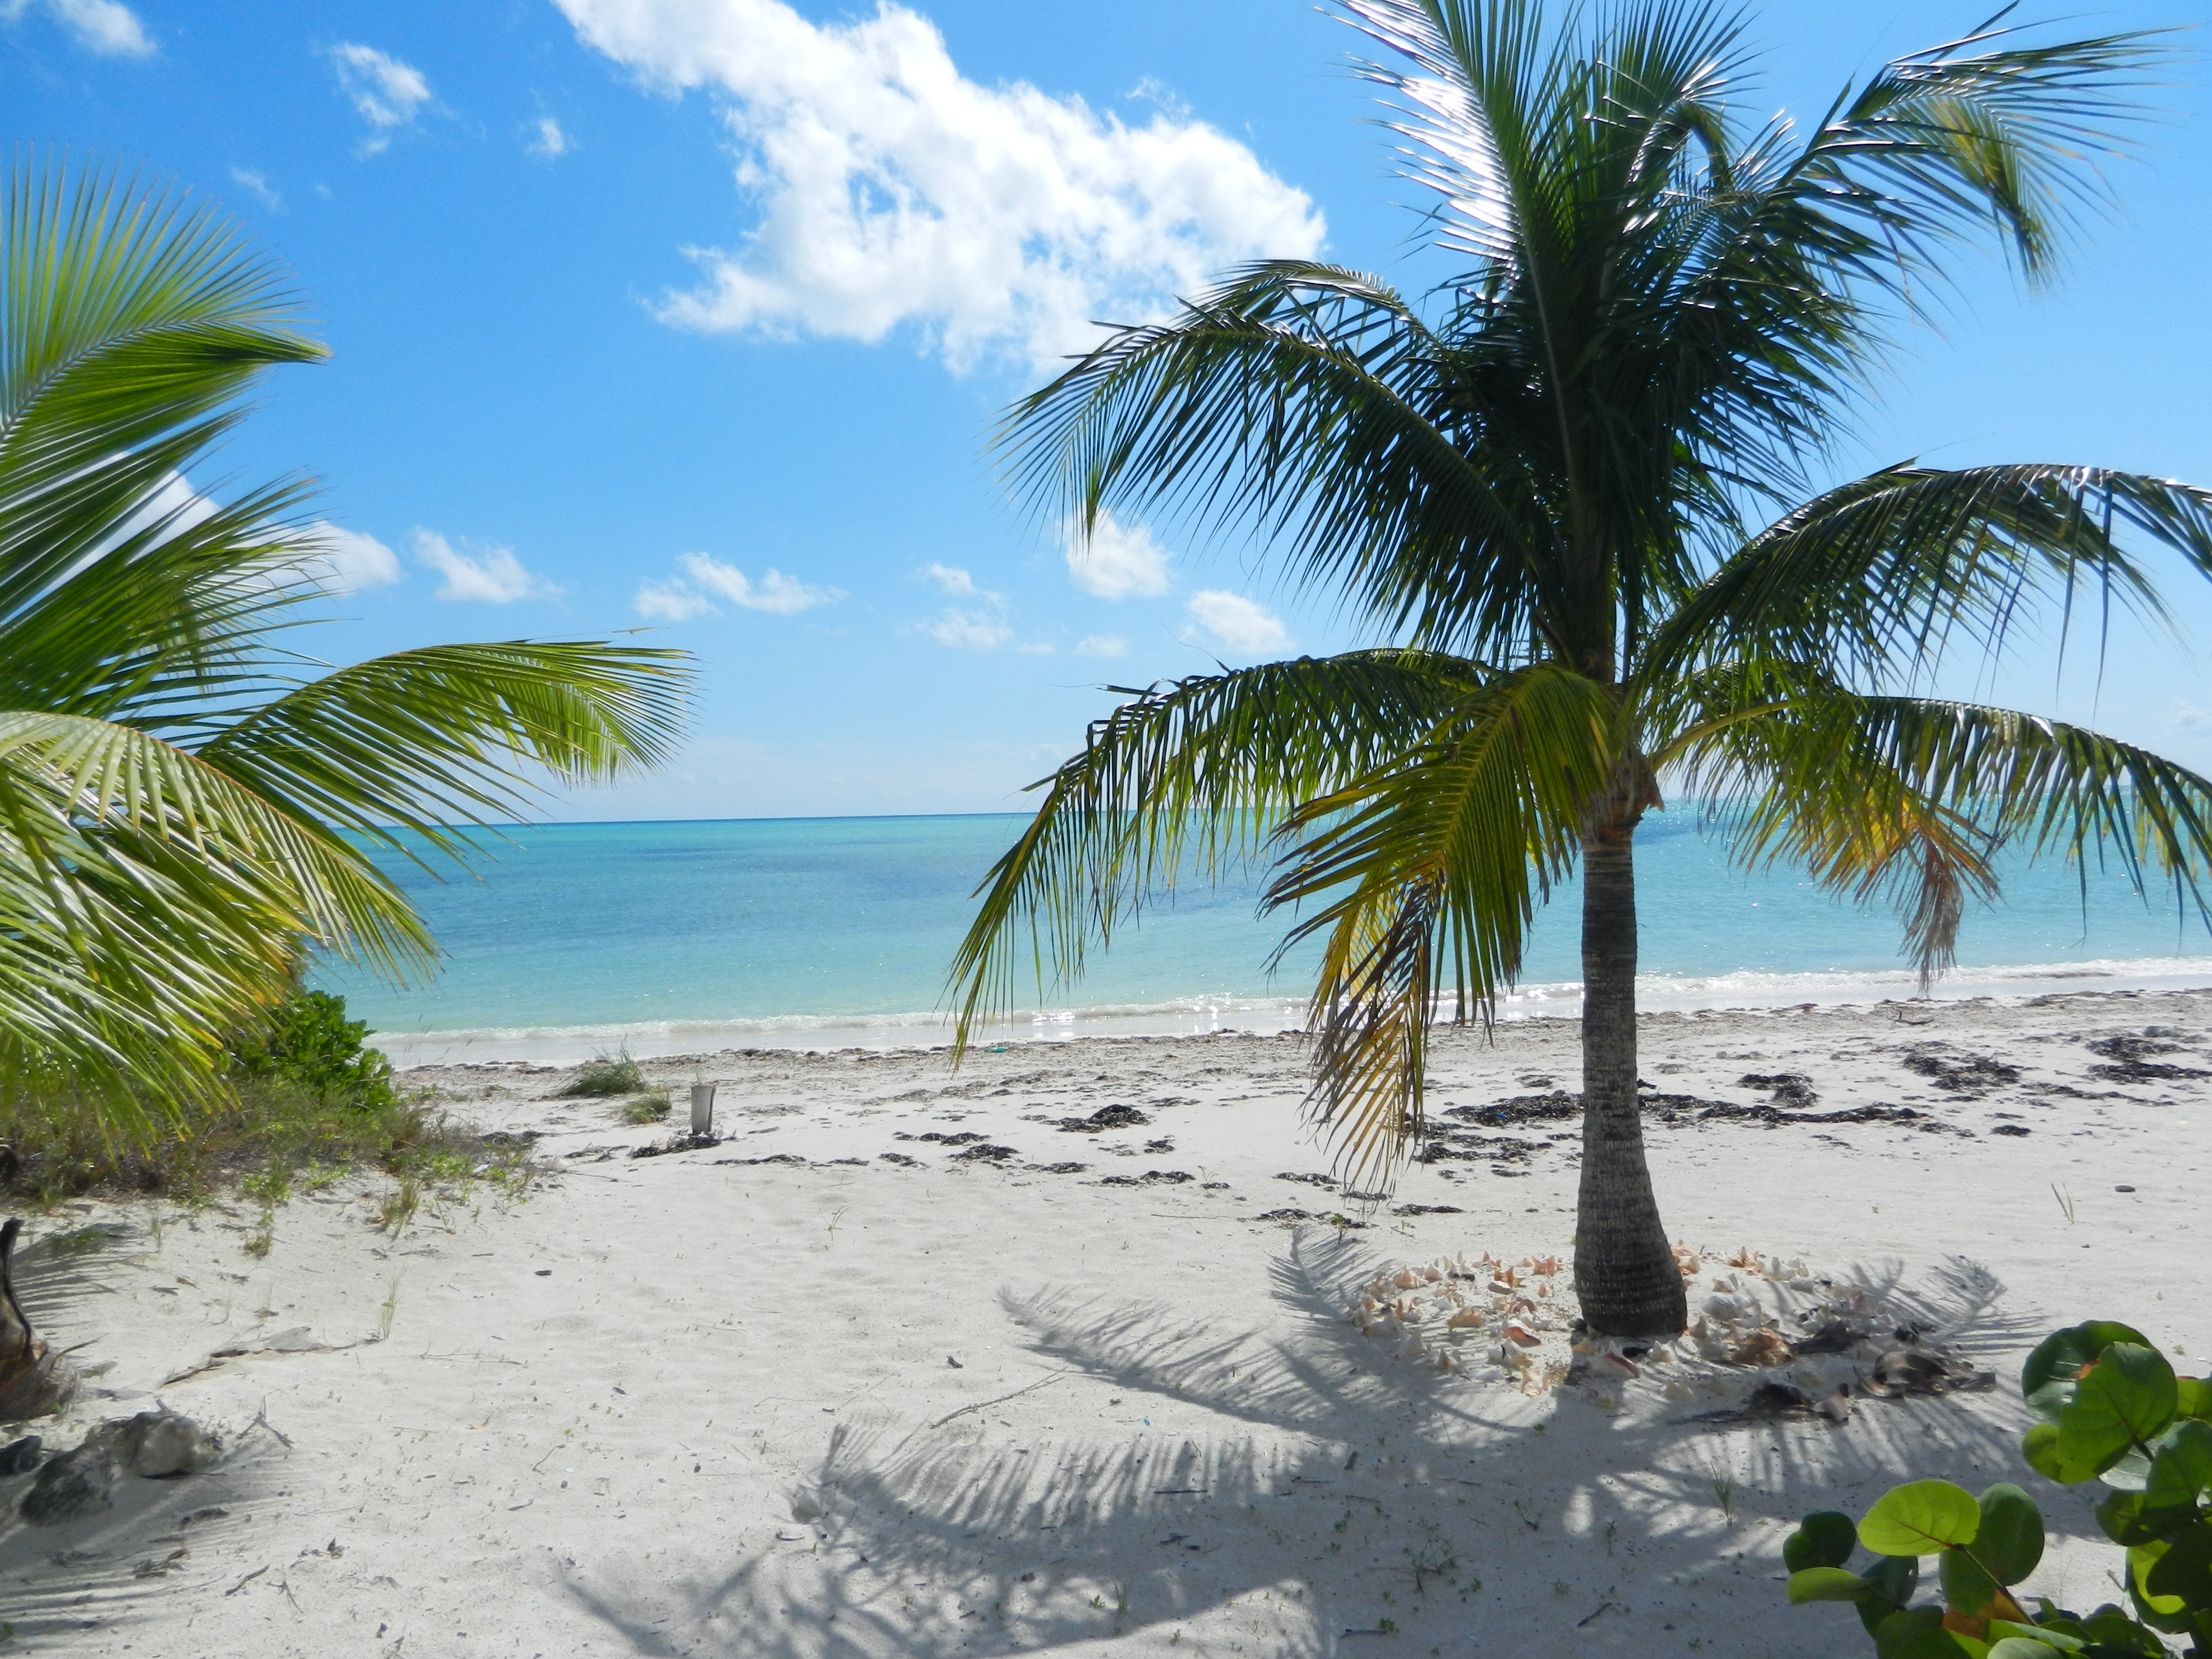 Calypso's Beach has soft white sand, gentle shallow water, and beautiful coconut trees.